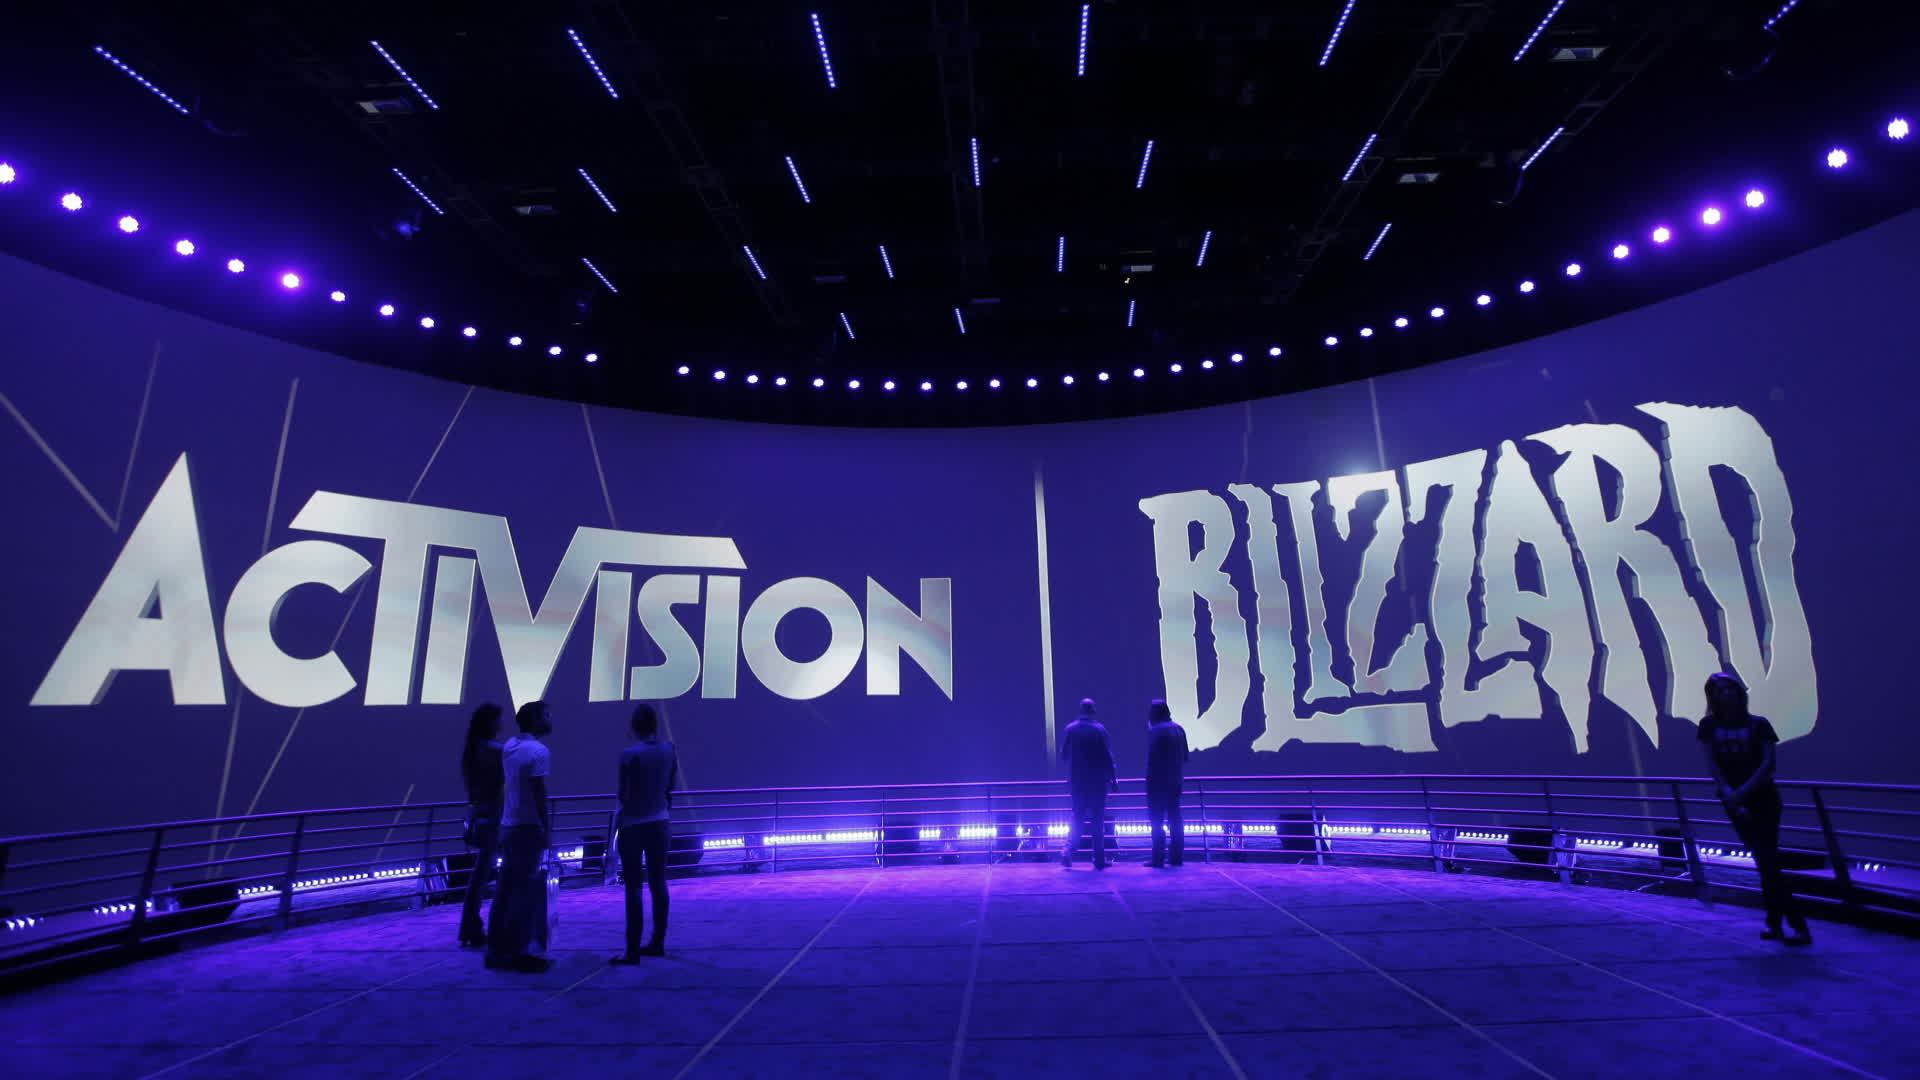 6 US treasurers demand answers from Activision Blizzard regarding harassment allegations thumbnail